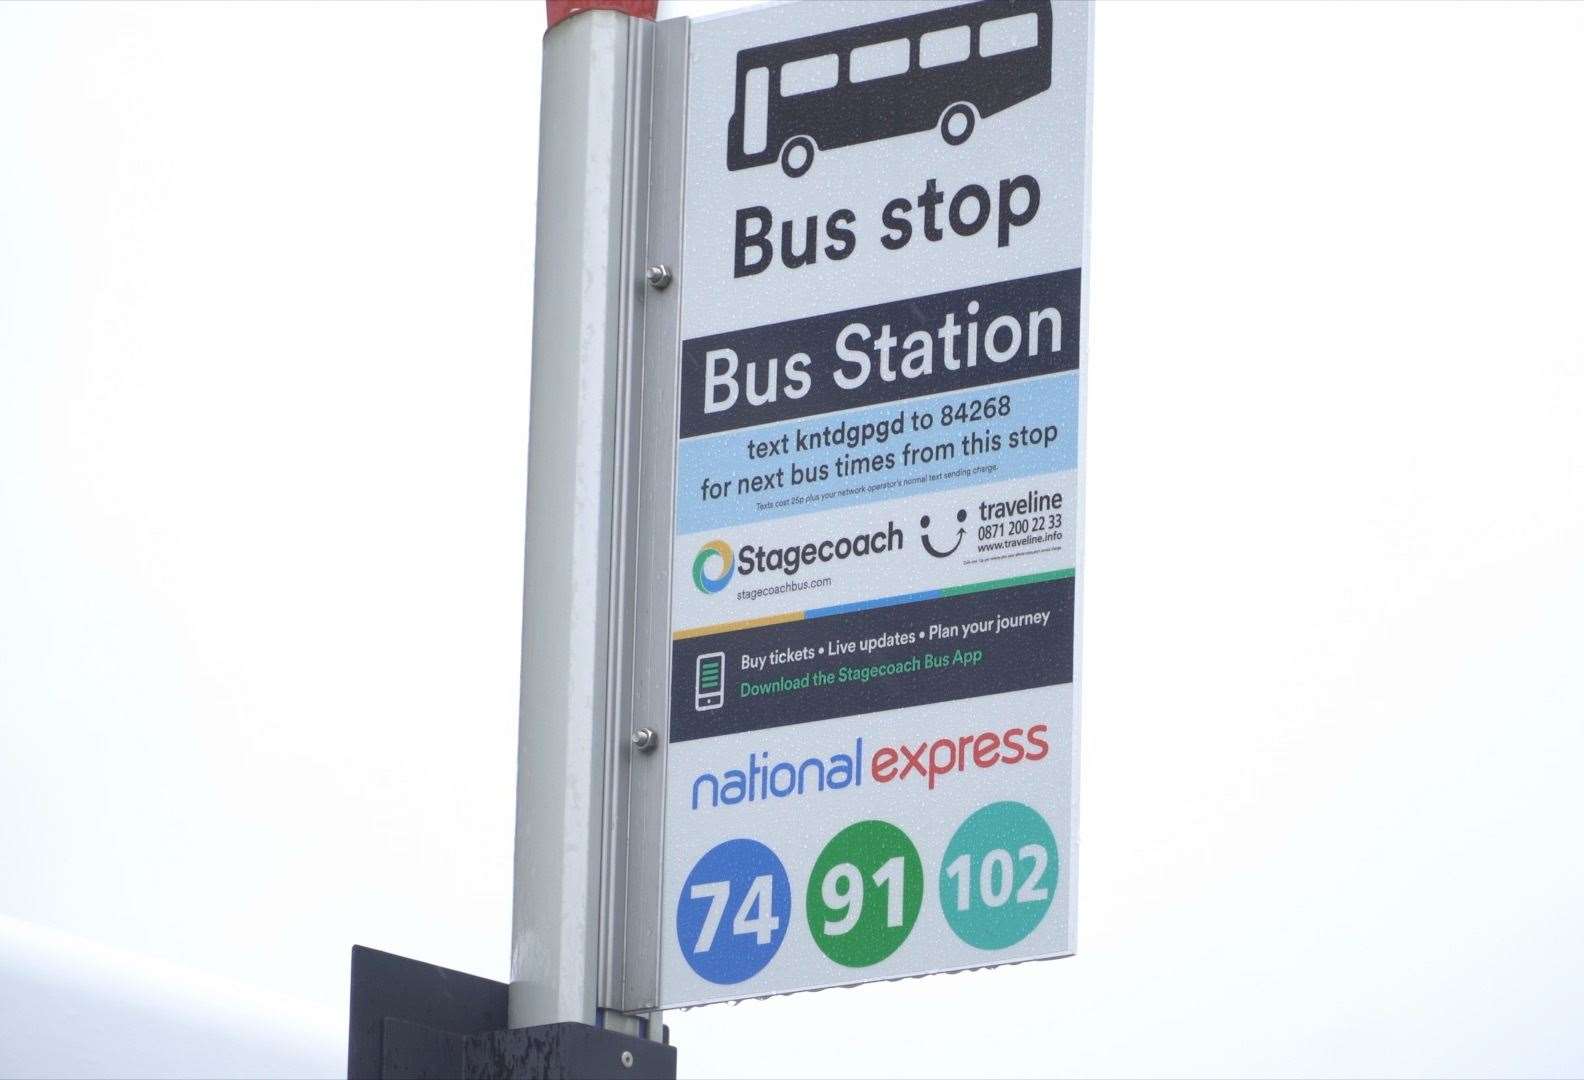 Five bus services have been cut by Stagecoach in the Folkestone area